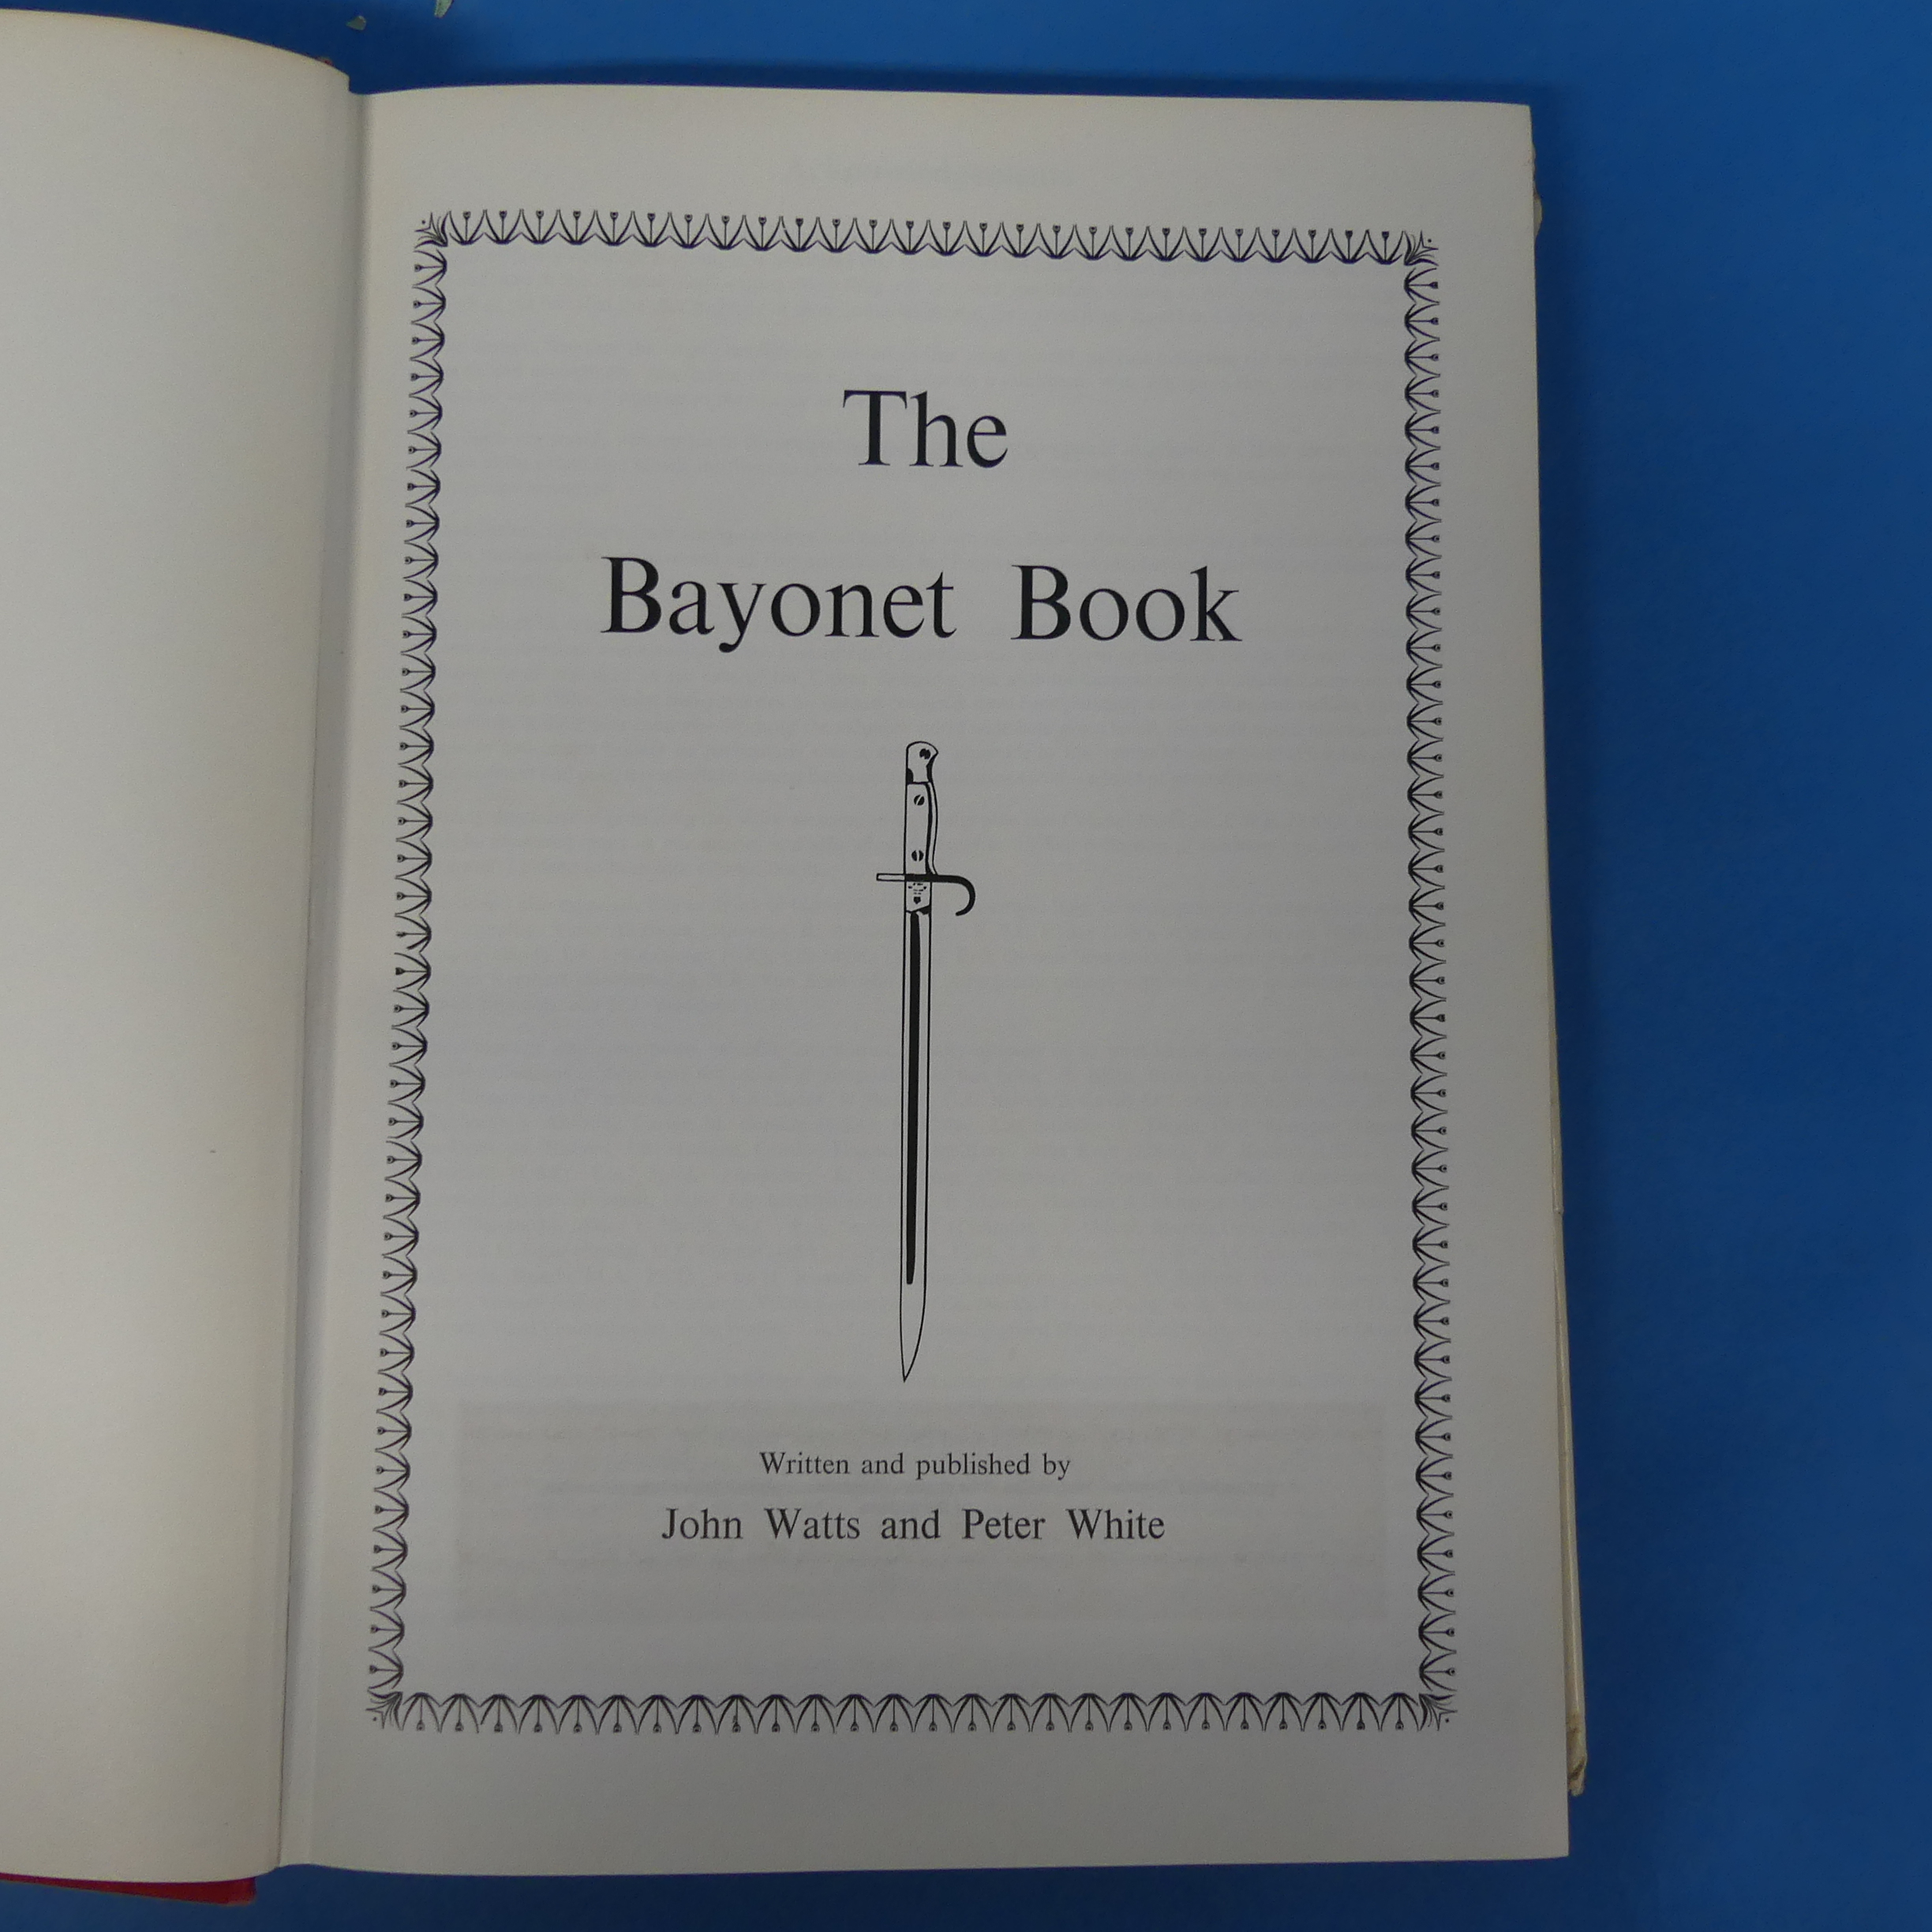 Watts (John) and White (Peter); 'The Bayonet Book', 1st edn., 1975, hardback with dust jacket, - Image 3 of 3